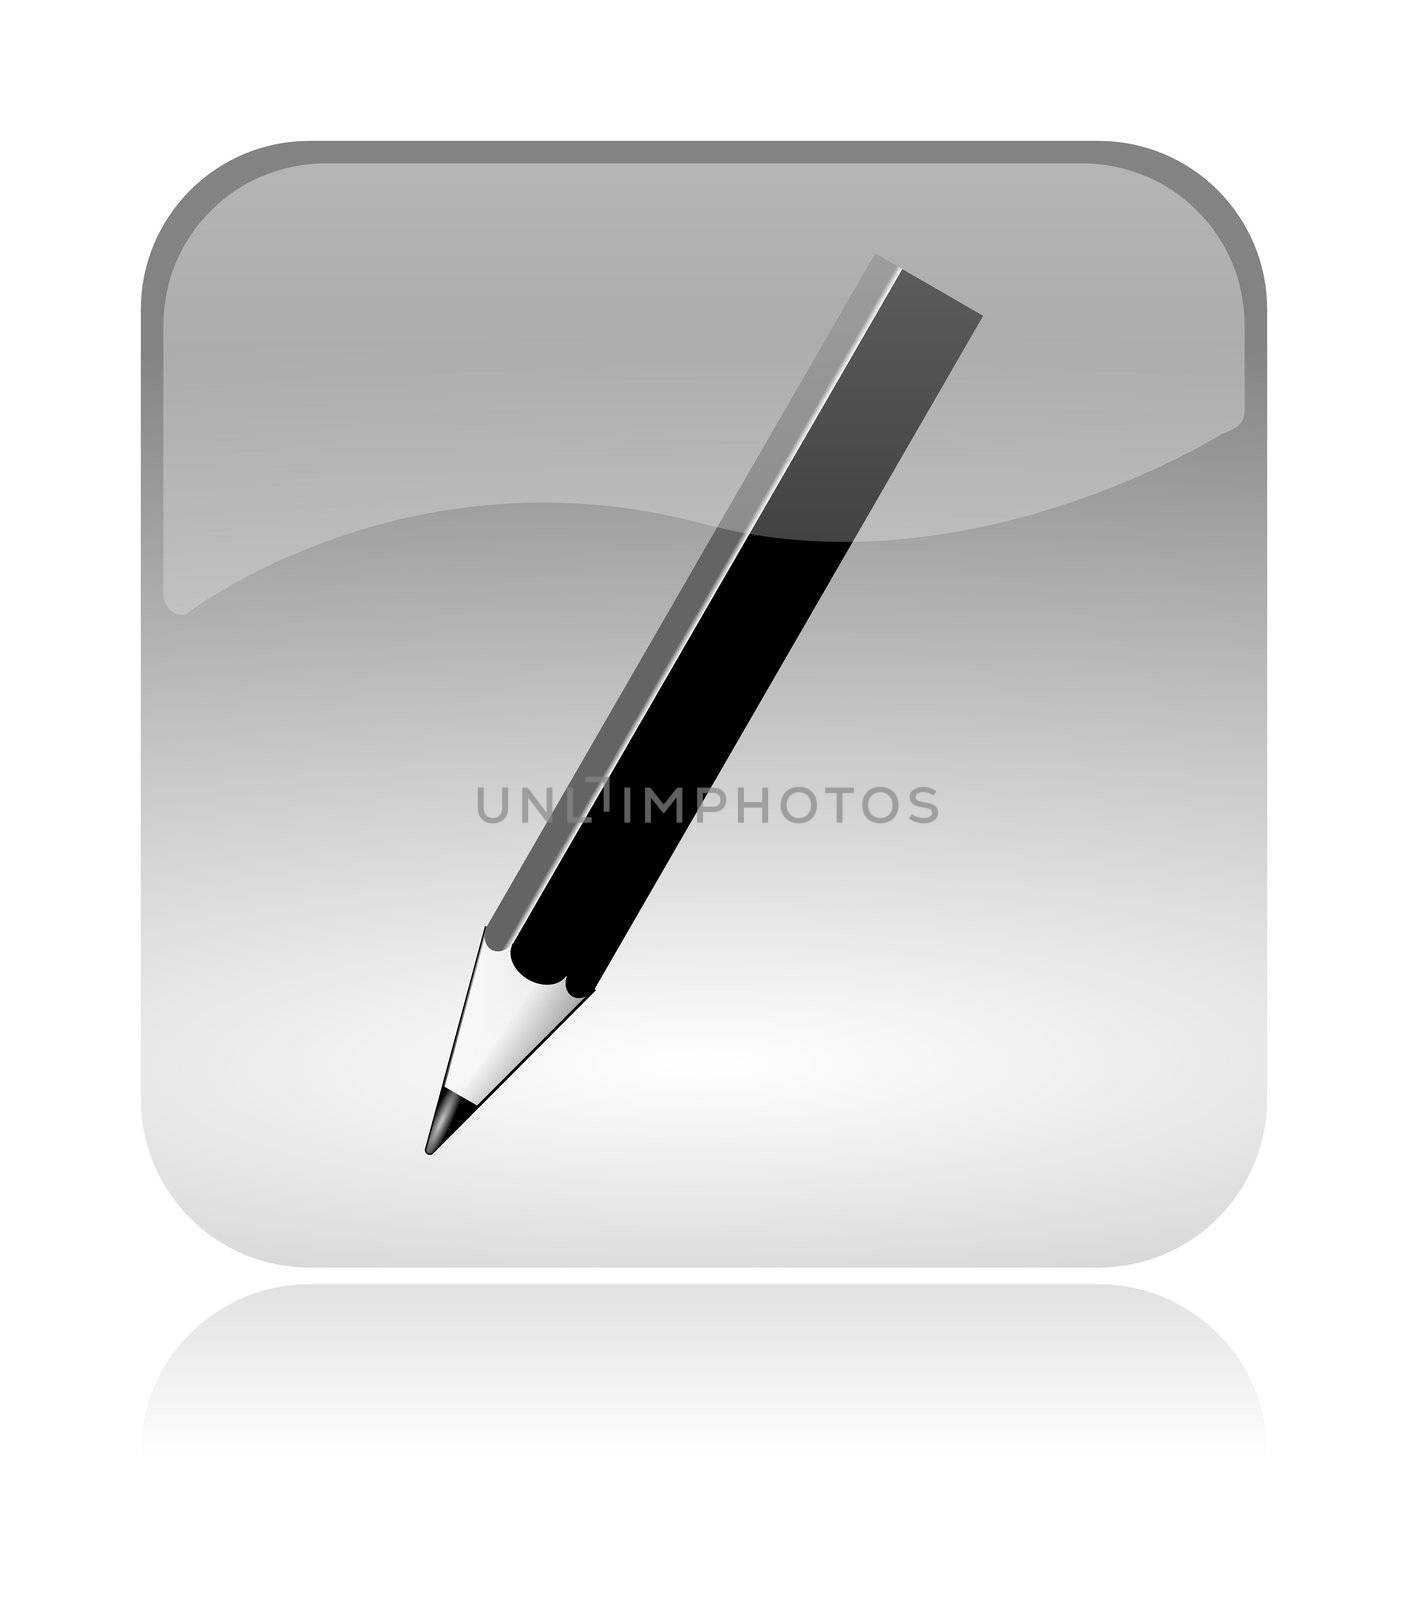 Pencil, crayon, white, transparent and glossy web interface icon with reflection